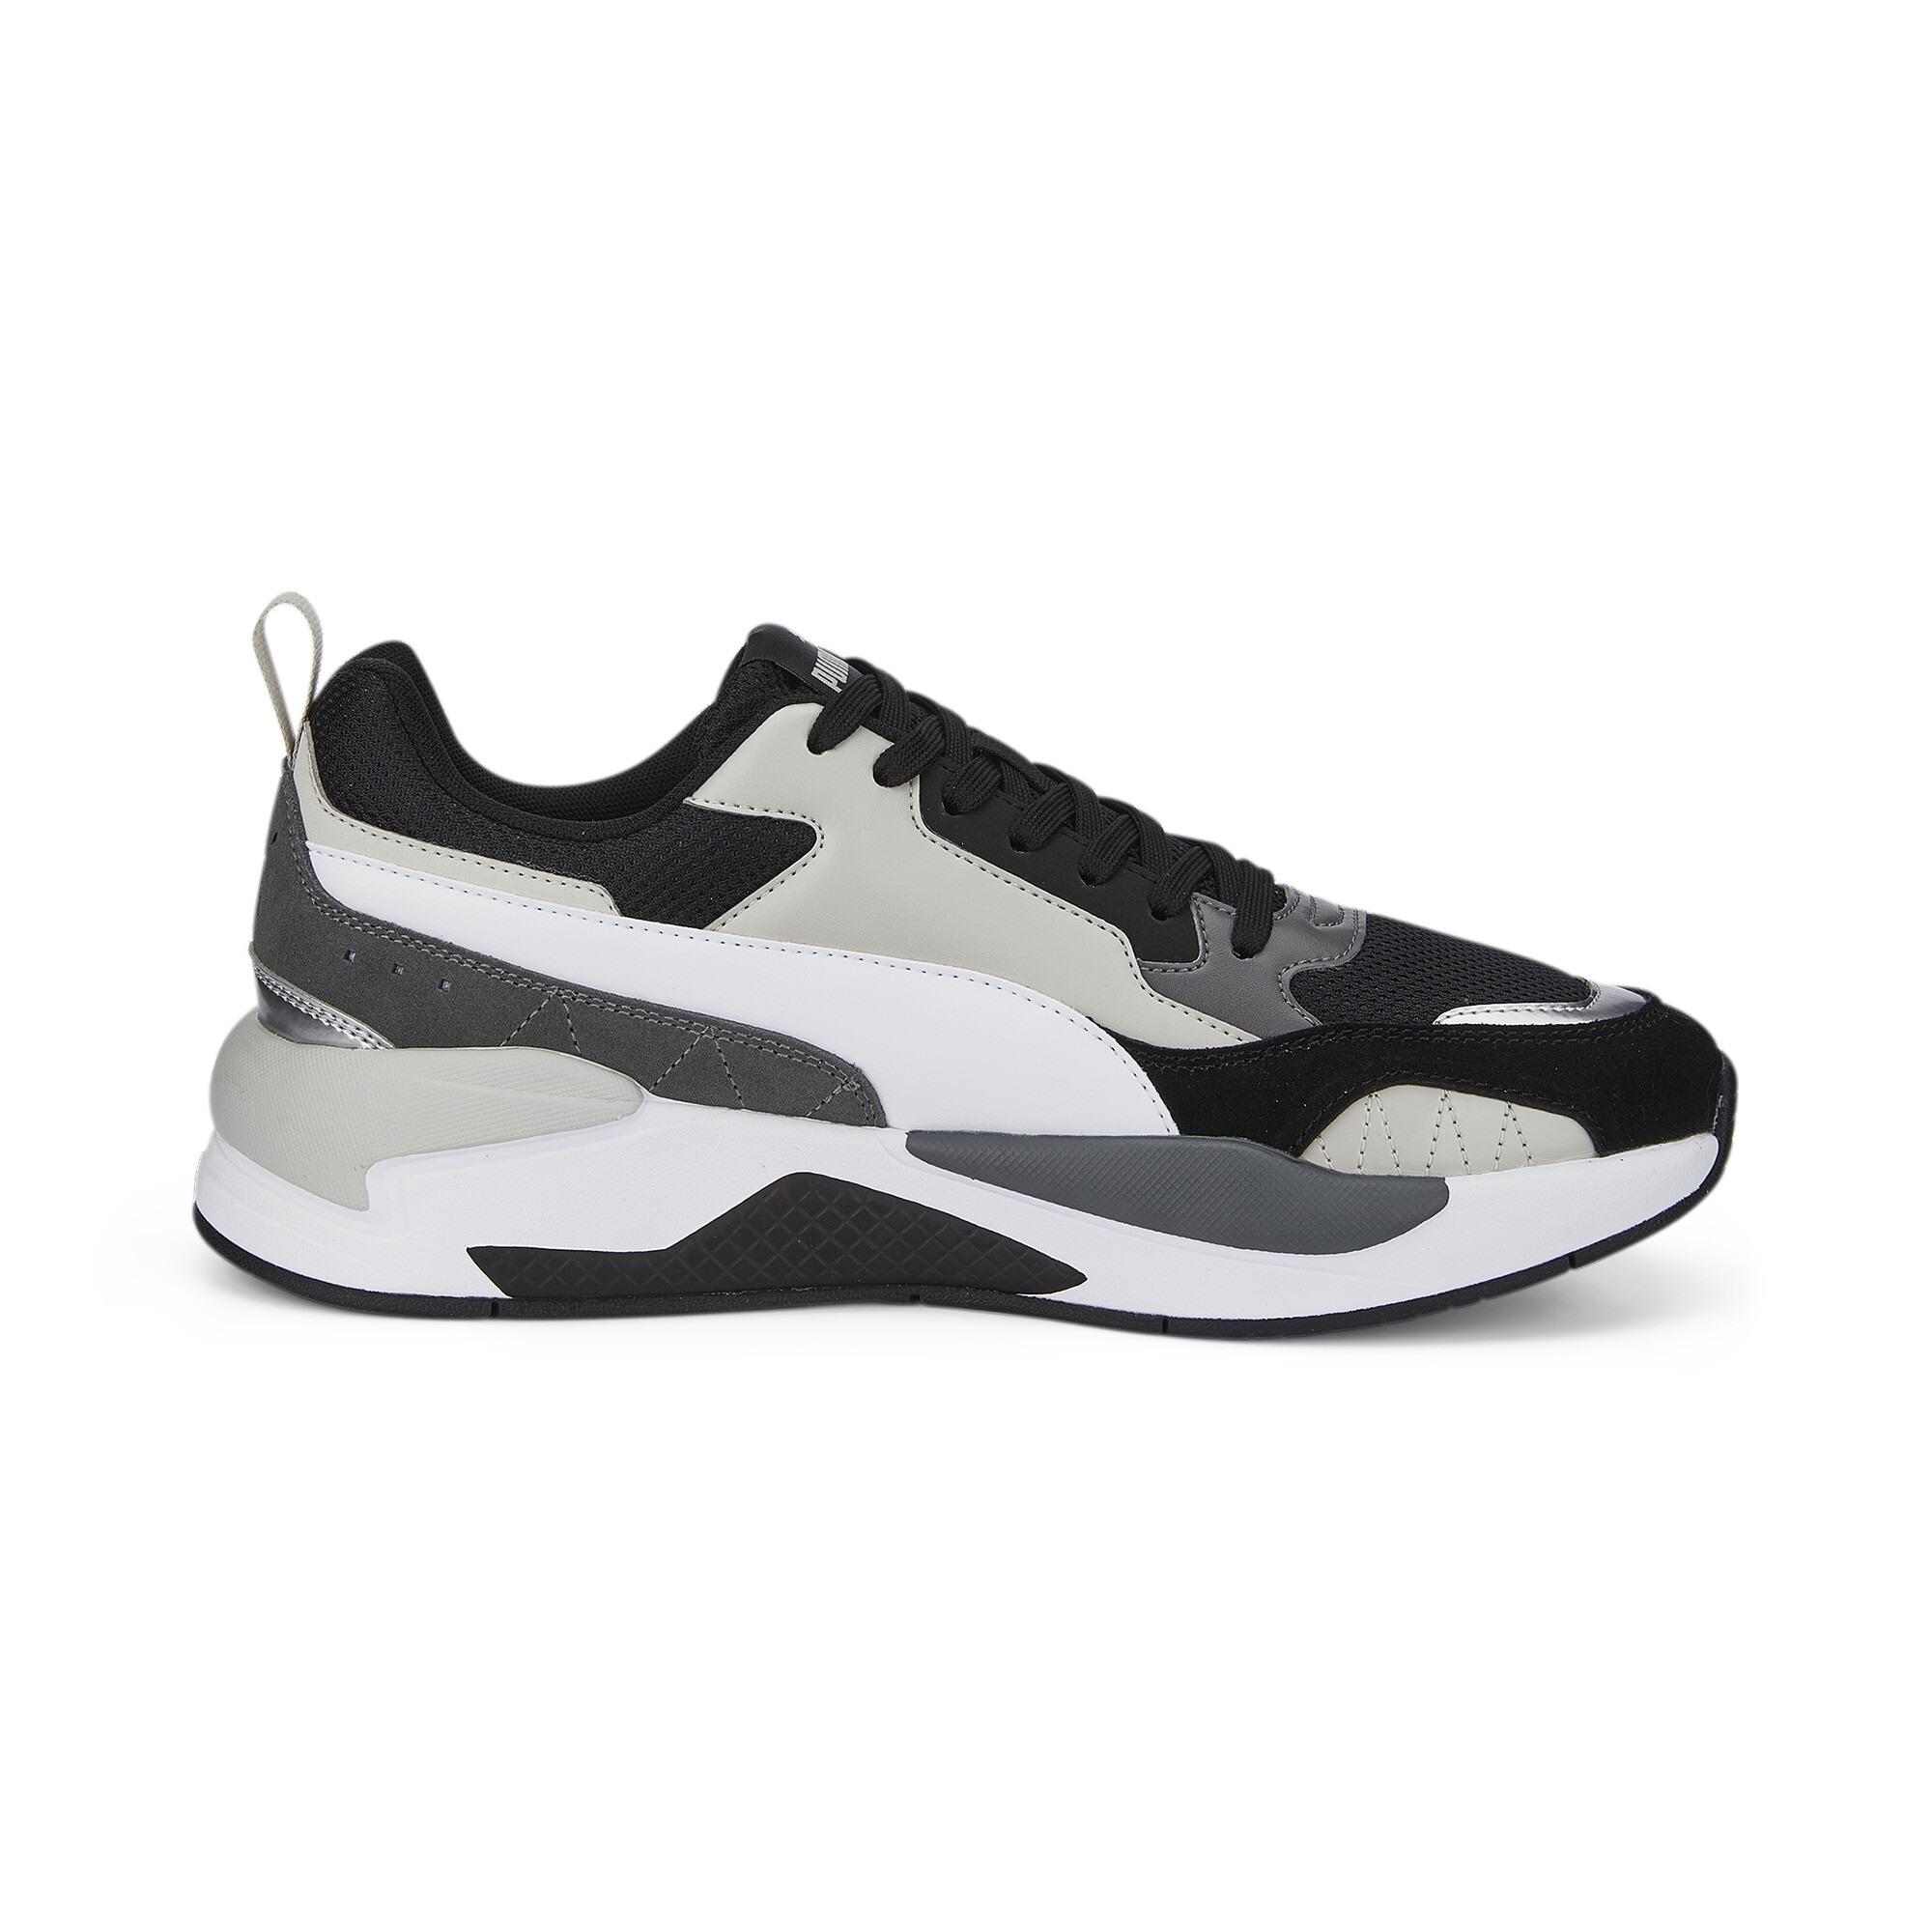 PUMA X-Ray Square SD Trainers Sports Shoes Low Top Lace Up Unisex | eBay